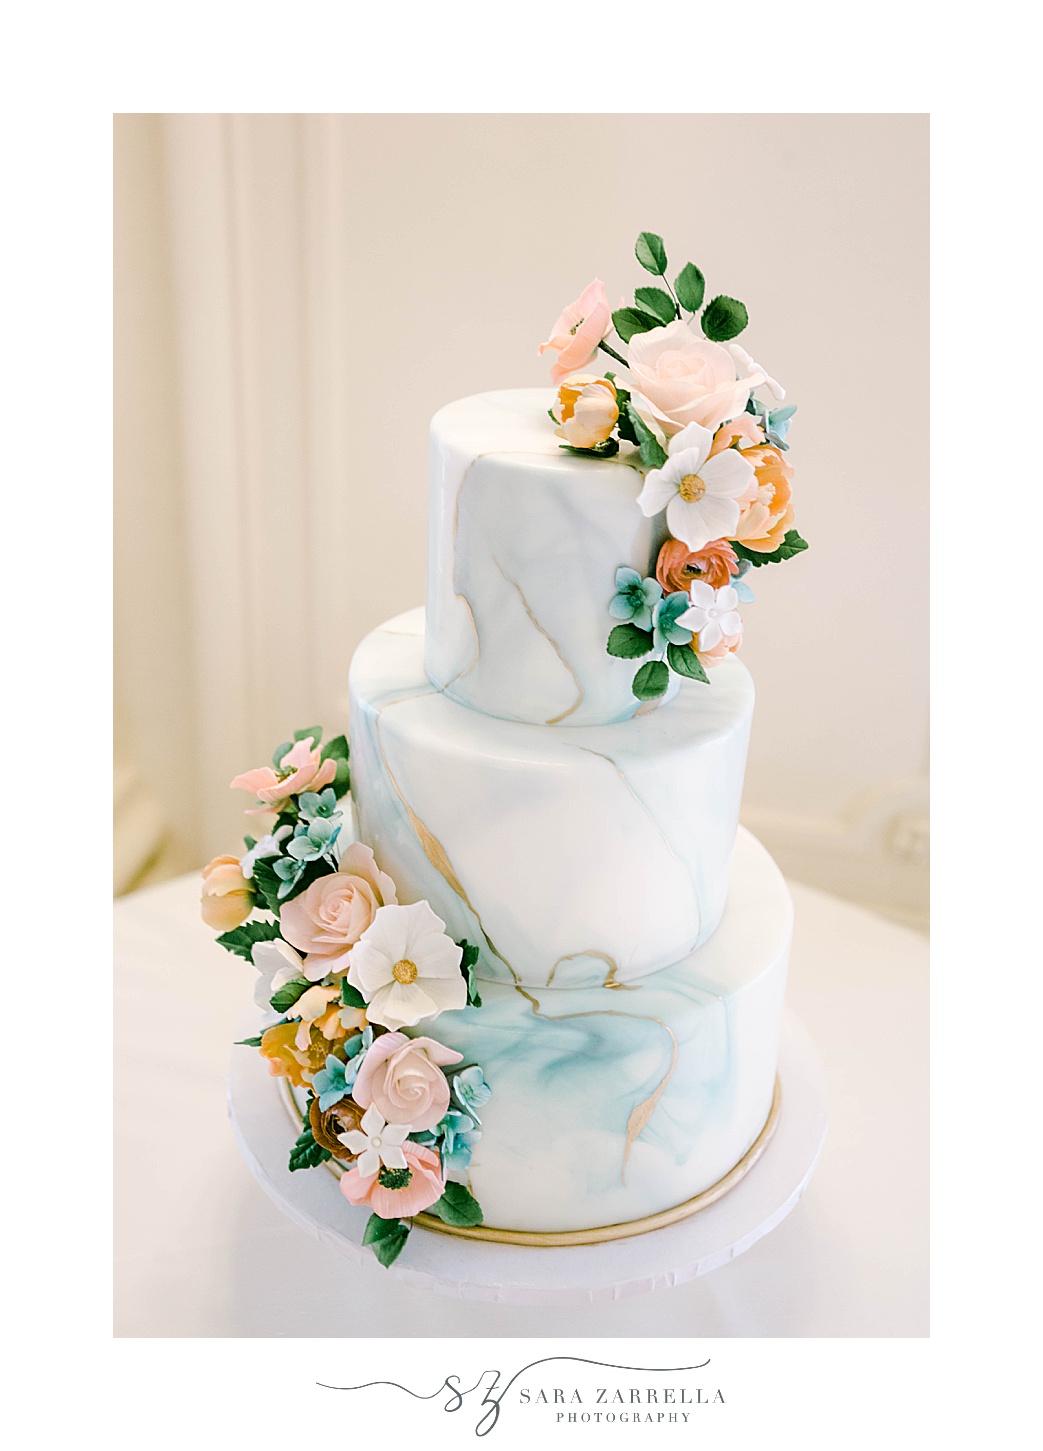 marbled wedding cake with pink and ivory floral accents